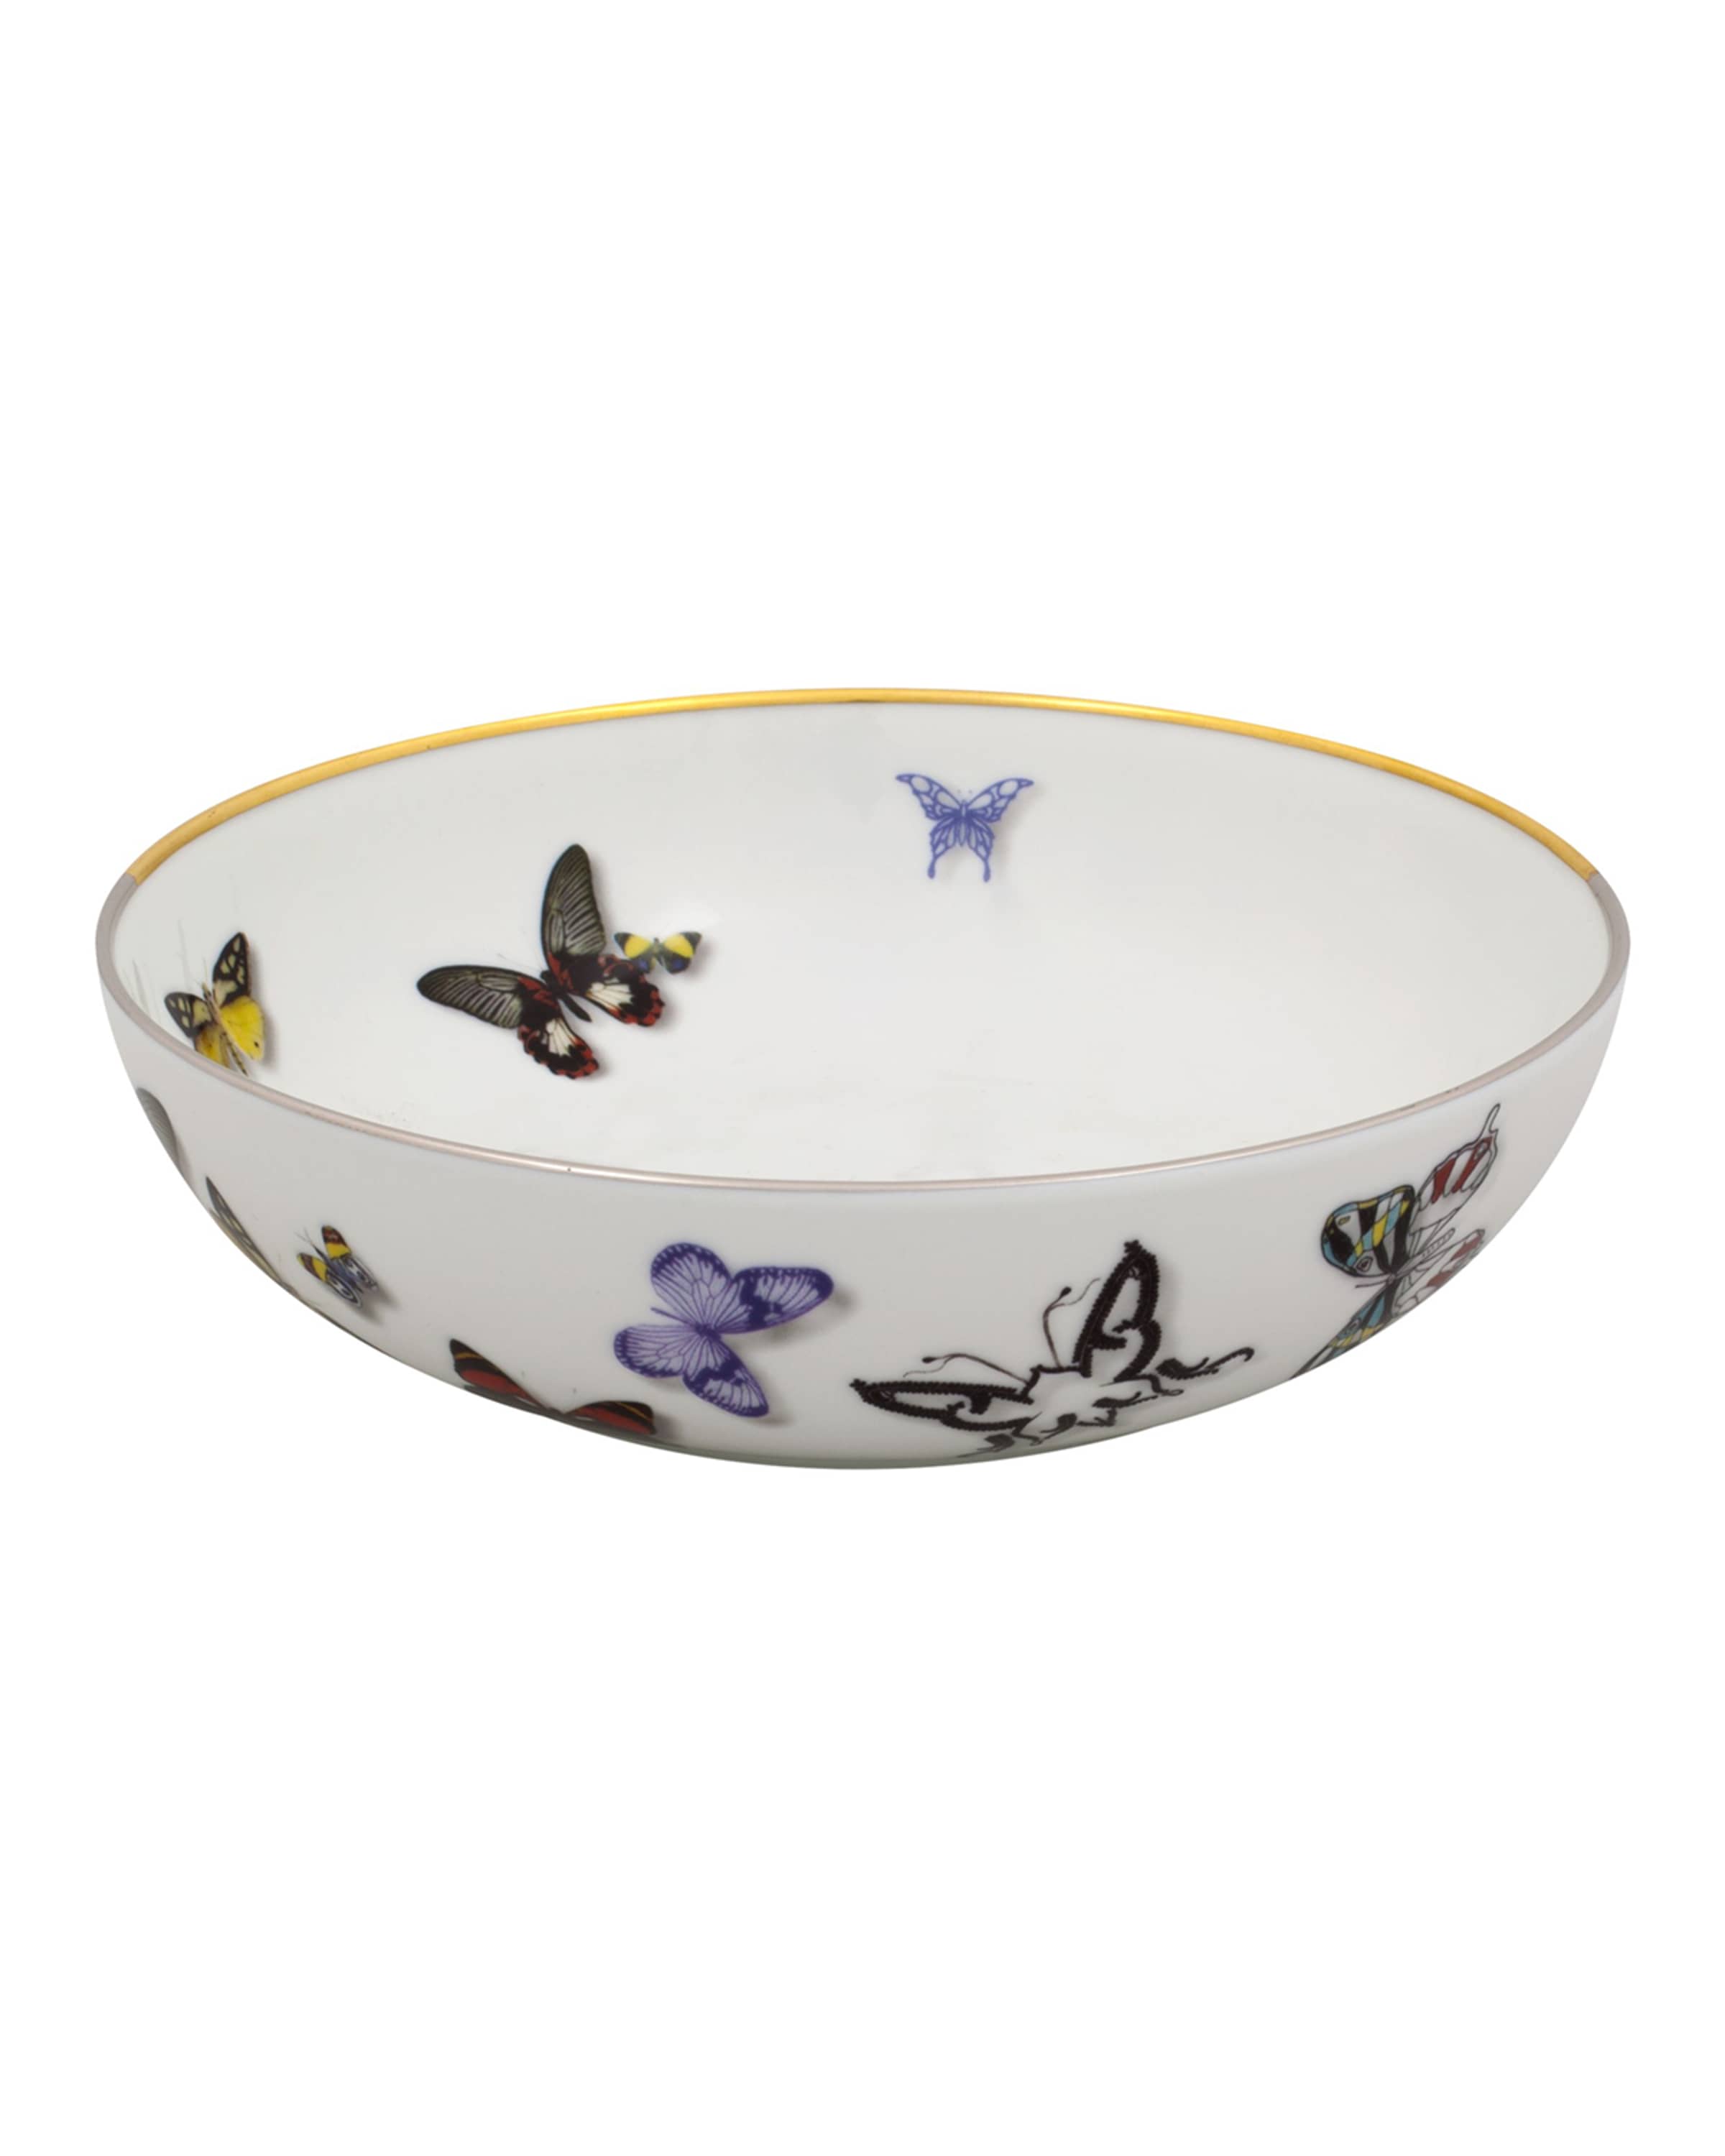 Christian LaCroix X Vista Alegre Butterfly Parade Cereal Bowl